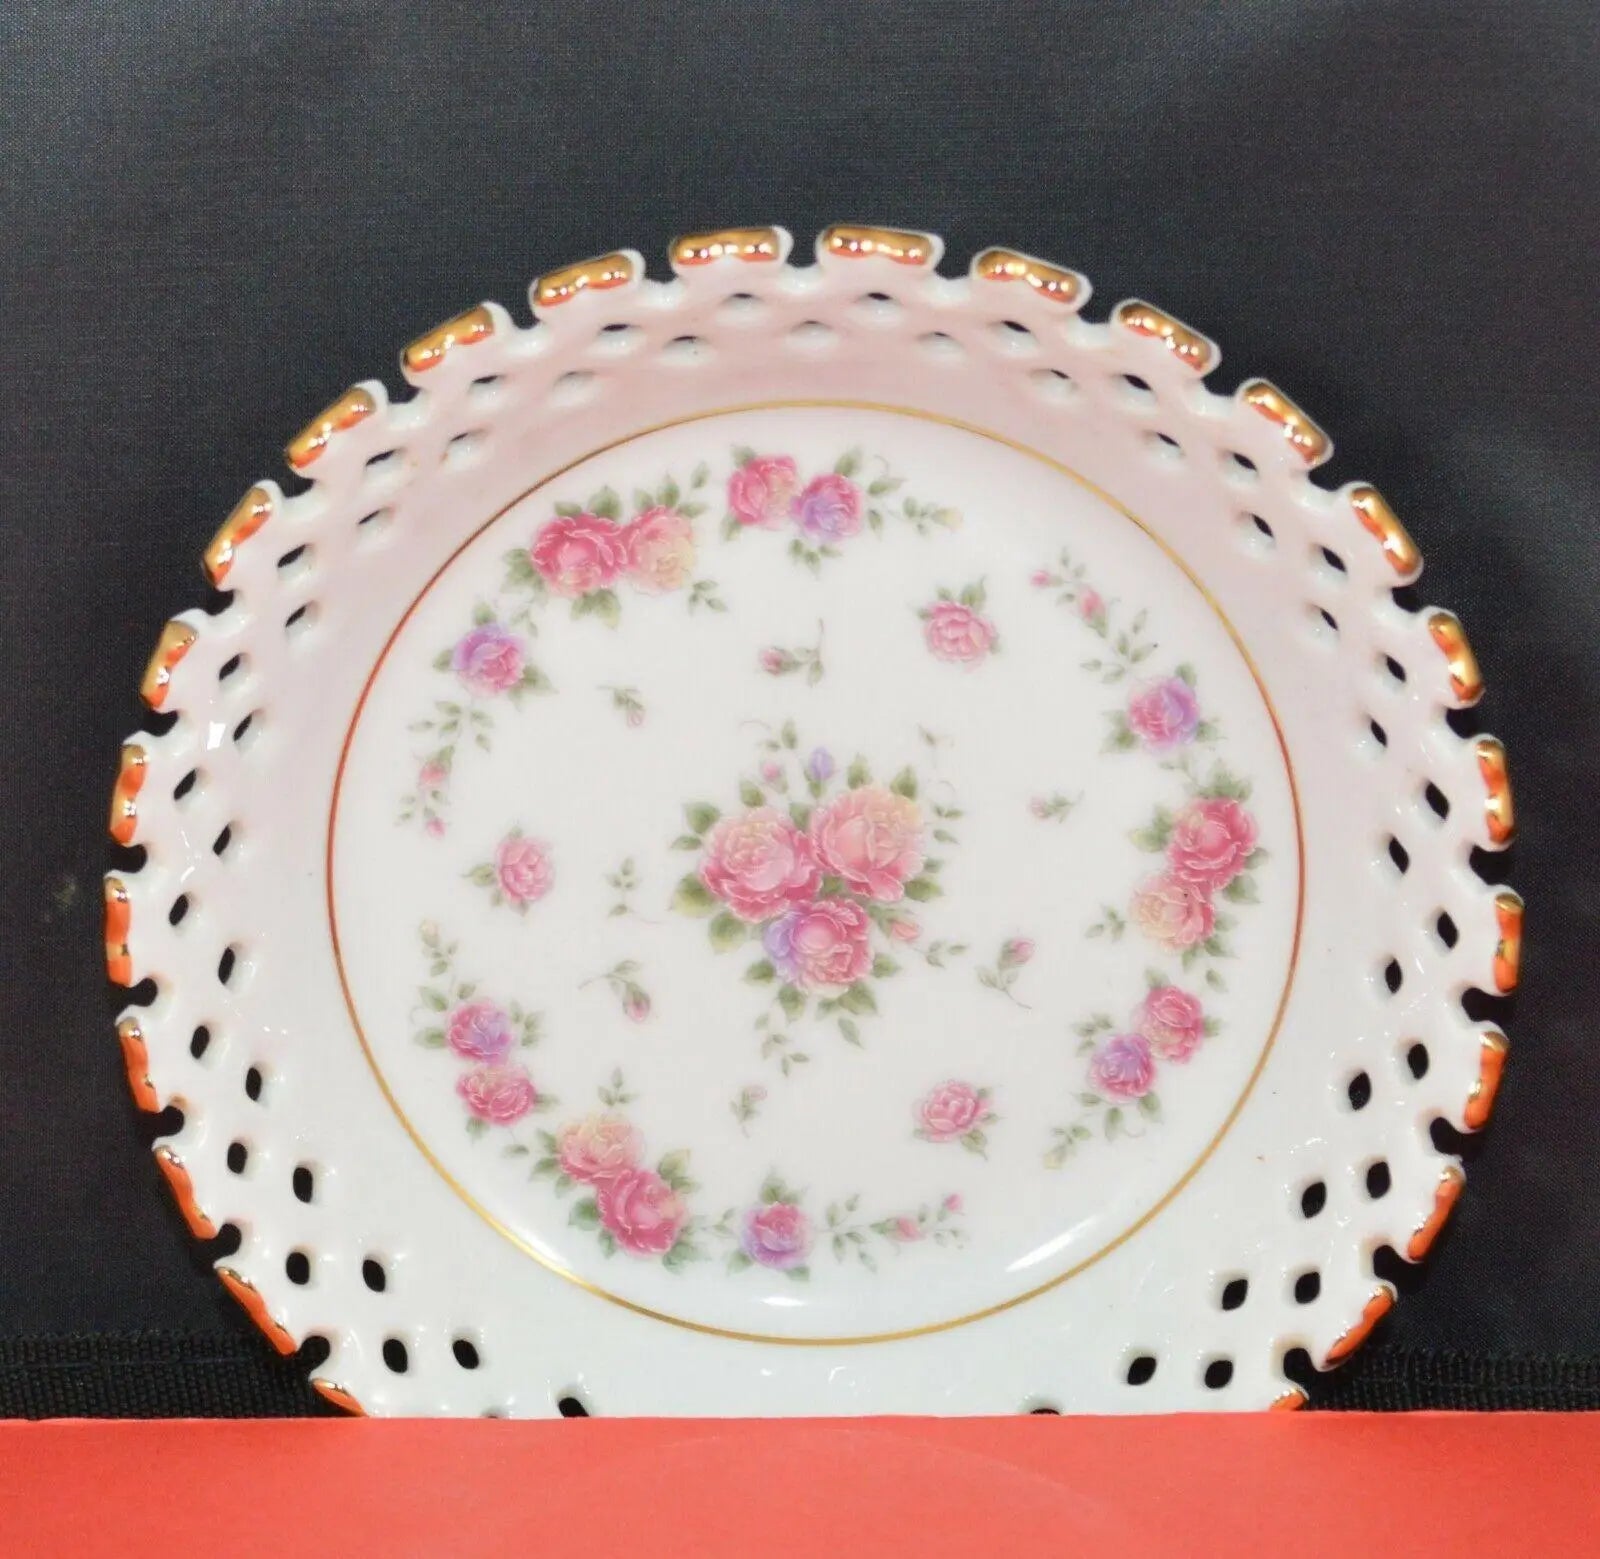 SMALL VINTAGE HANDLED LATTICE DISH WITH FLORAL PATTERN - TMD167207